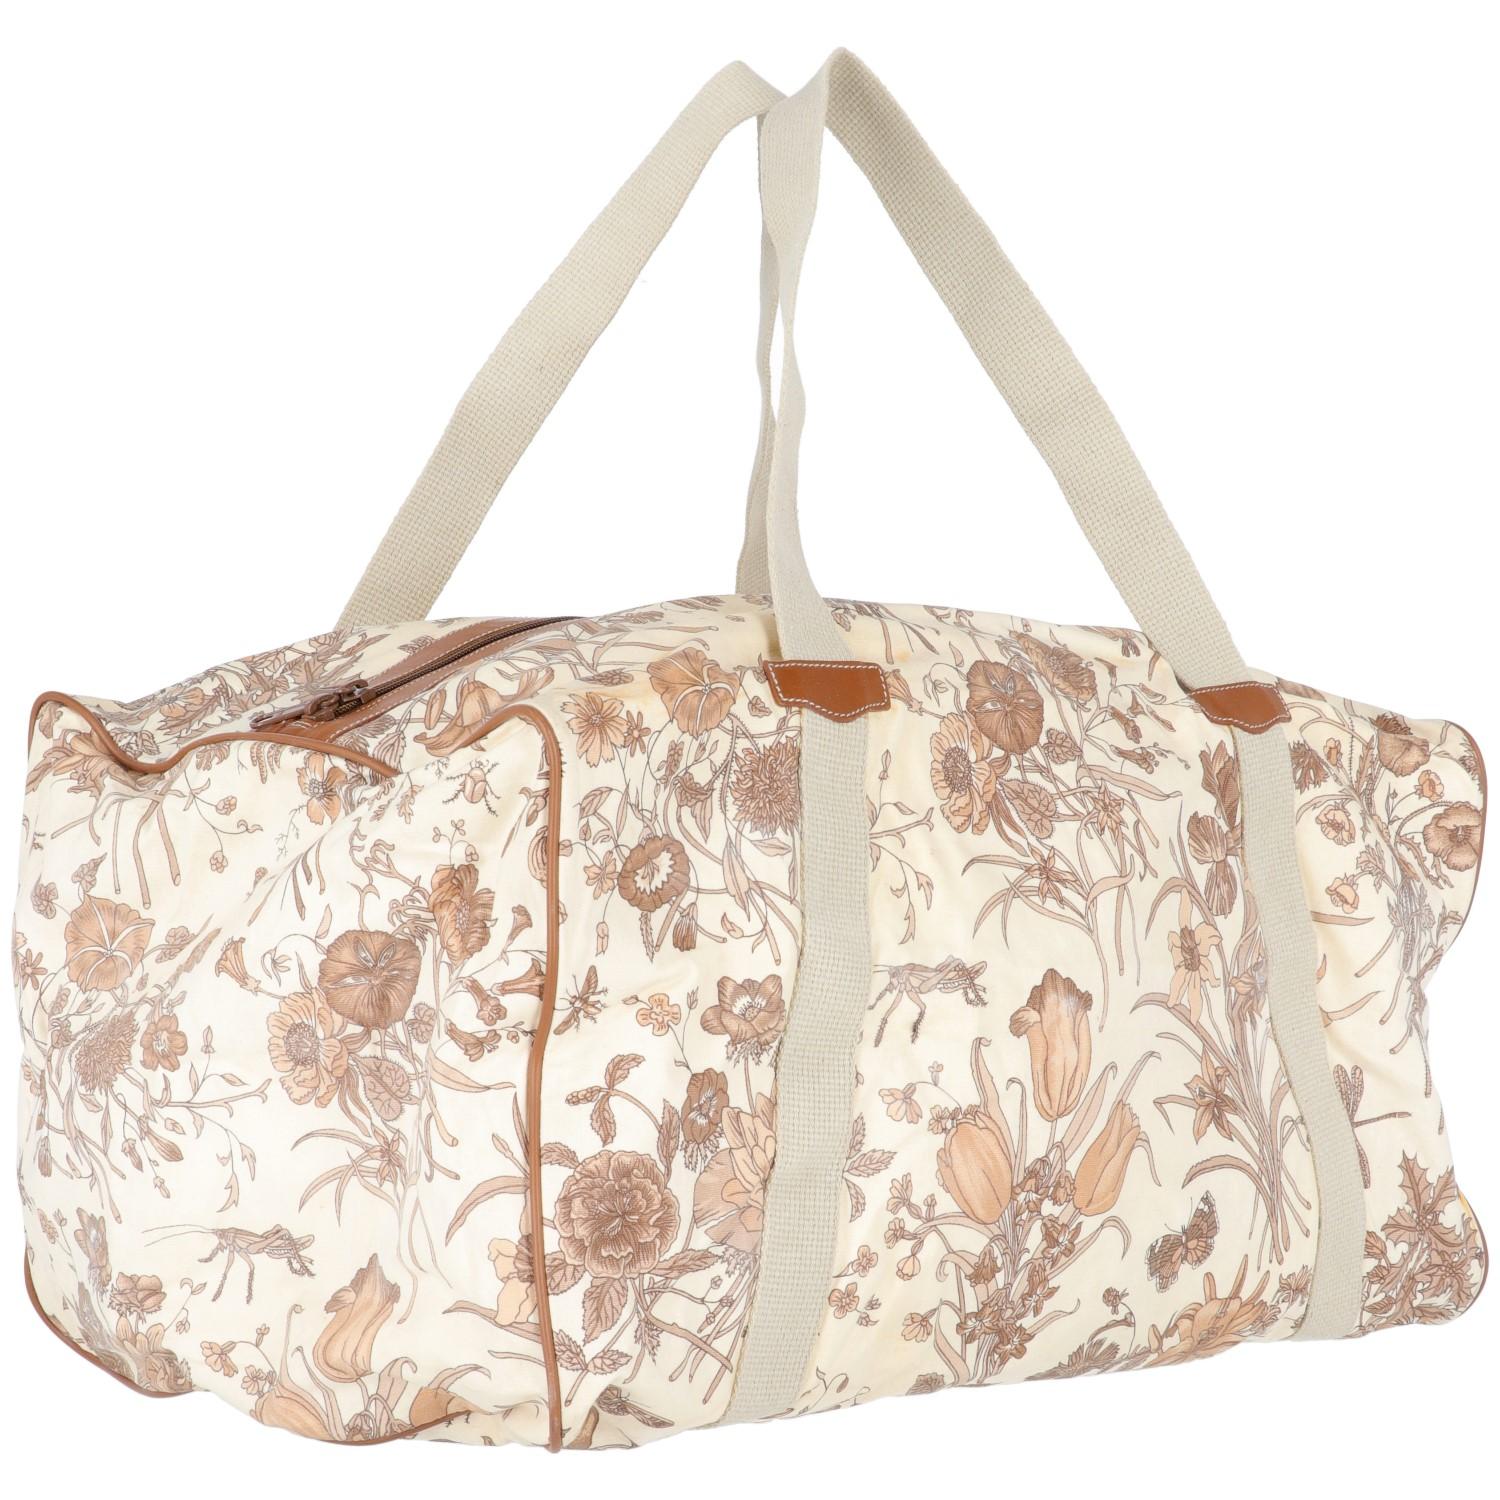 The Gucci beige canvas duffle bag features a brown and beige flora and fauna print, with zip fastening, outer side zipped pocket, ivory lining and gold-tone branded inner tag.
The item shows stains and signs of wear at lining and on the canvas, as